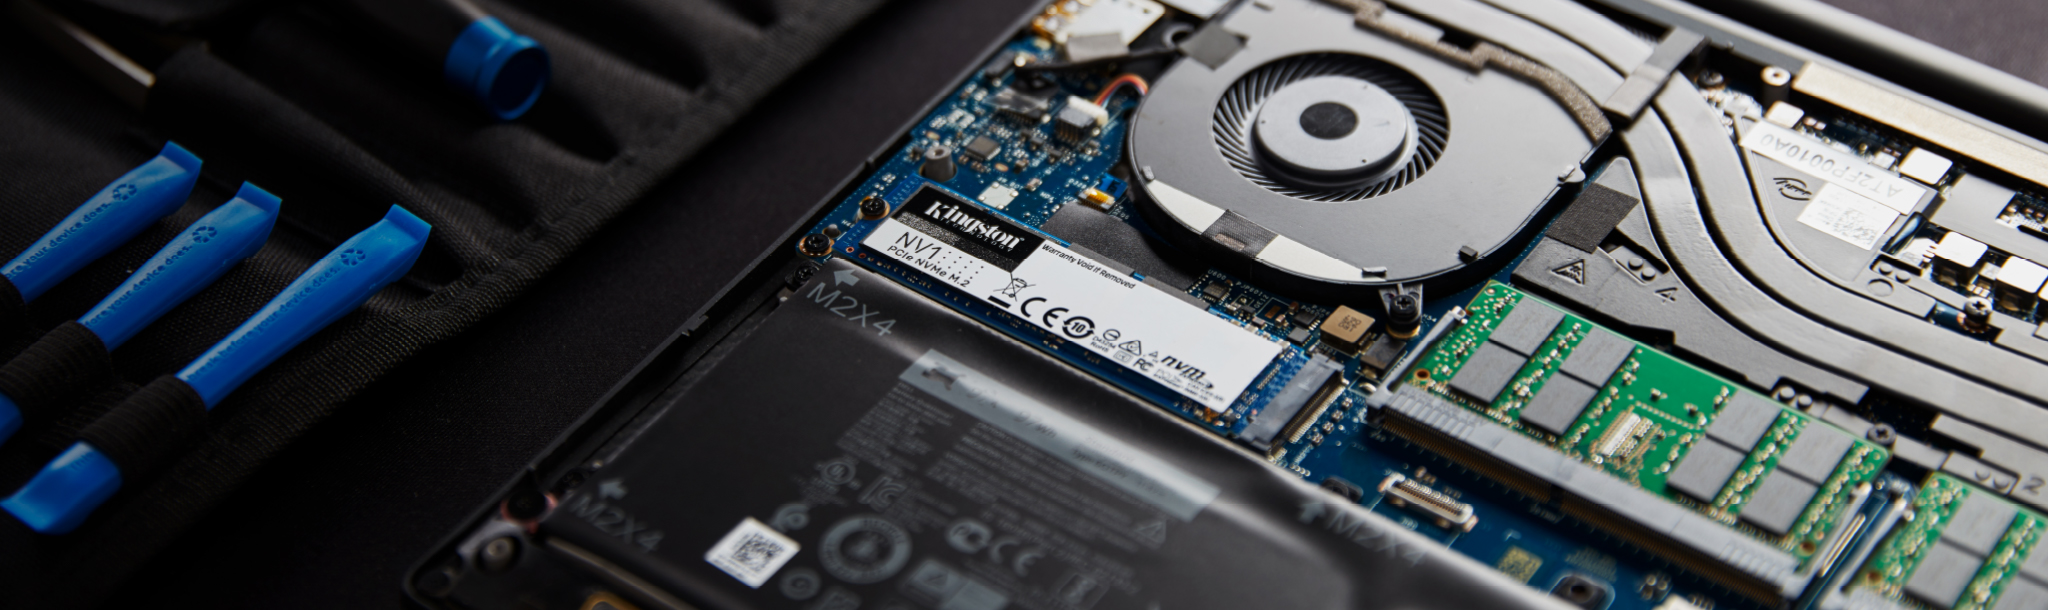 Horror Constraints rod Improve Your PC or laptop's Performance with SSDs and More Memory -  Kingston Technology